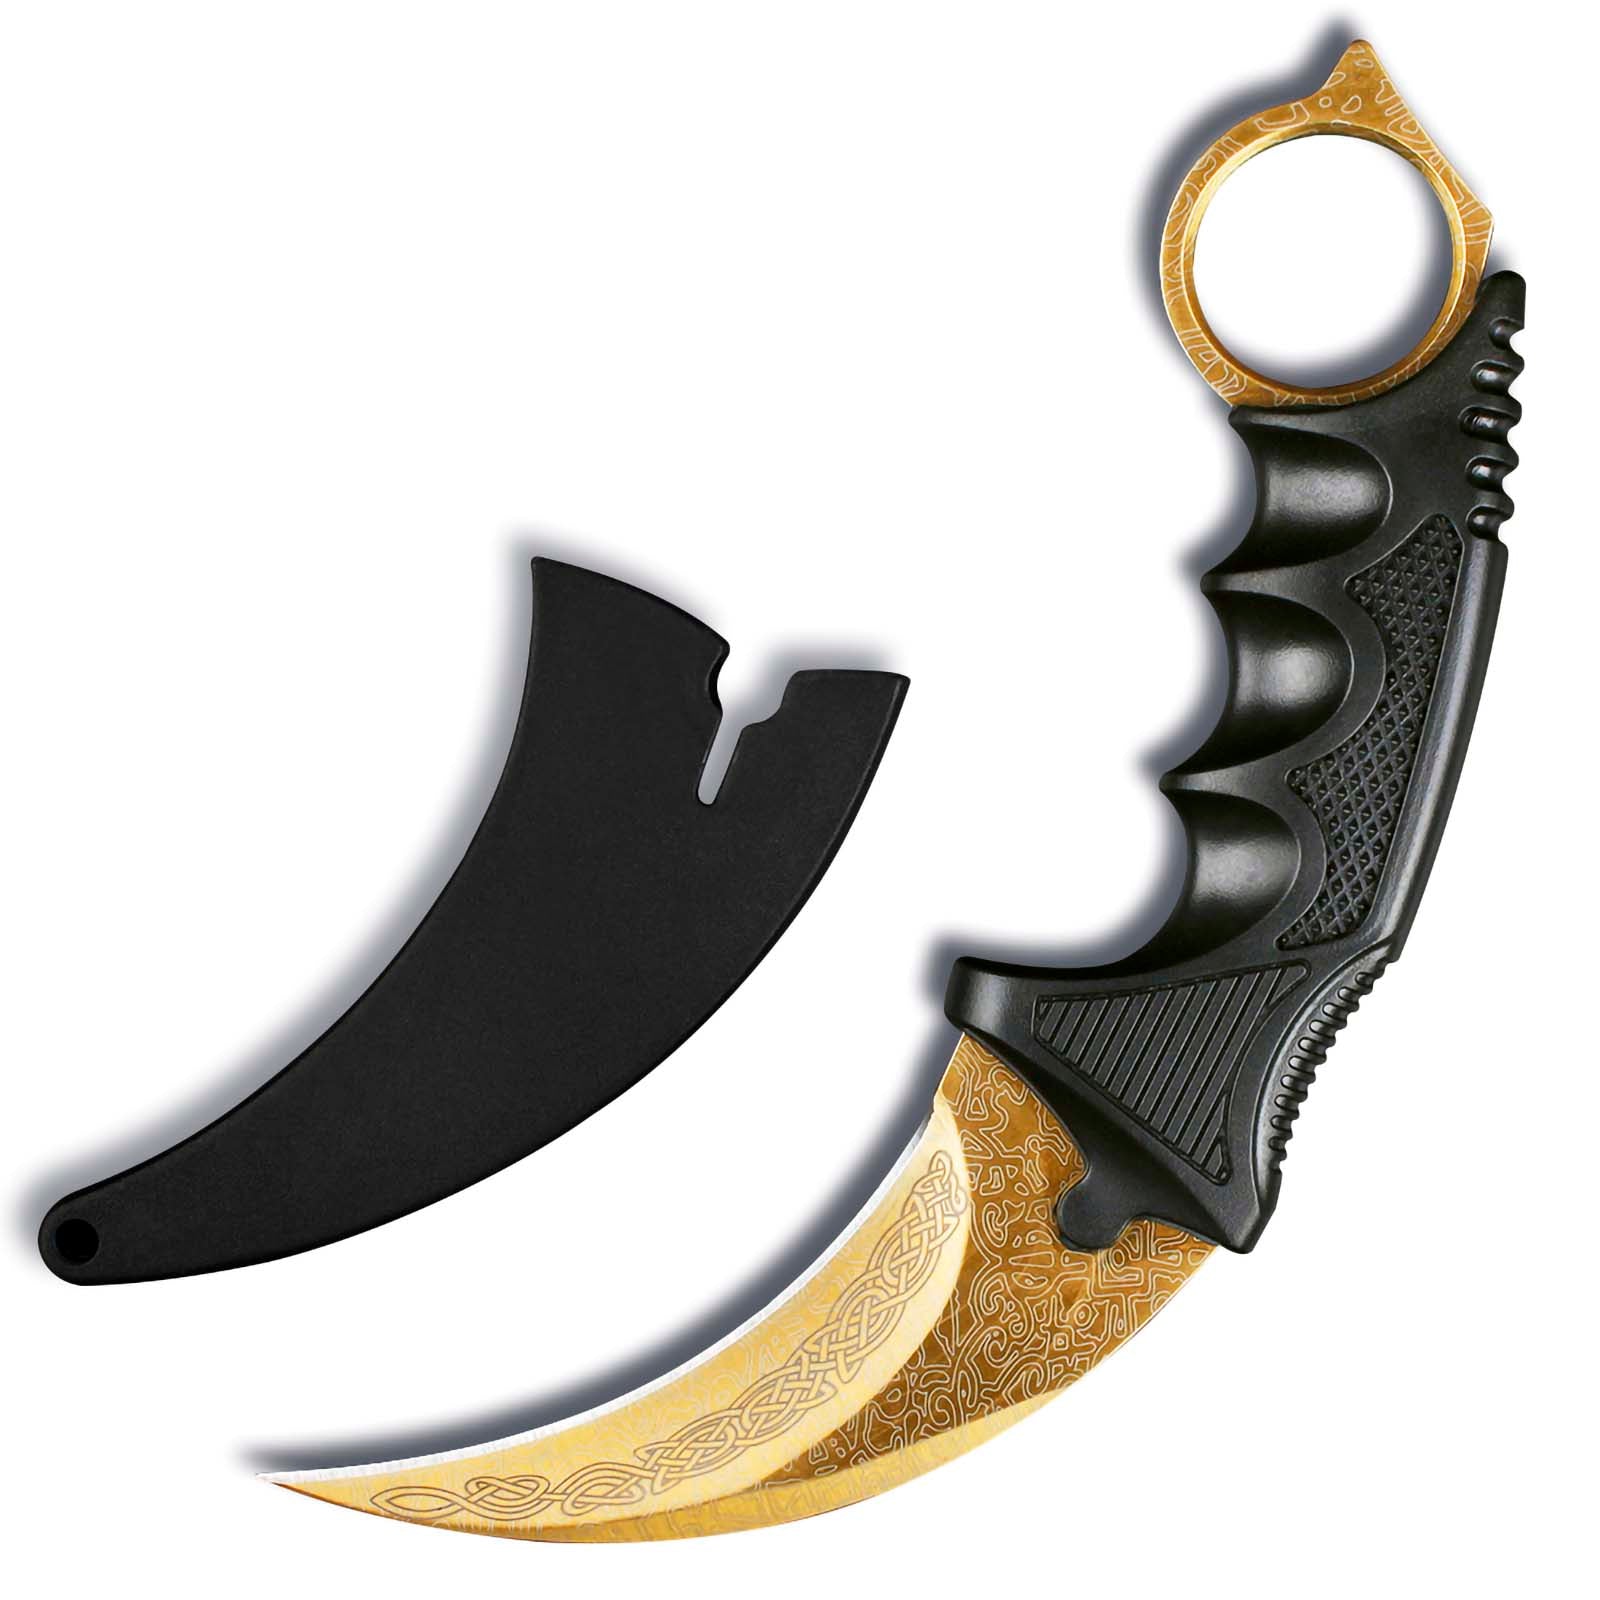 Andux Karambit Knife Tool CS/ZD-01 Golden (ONLY Available in the United States)